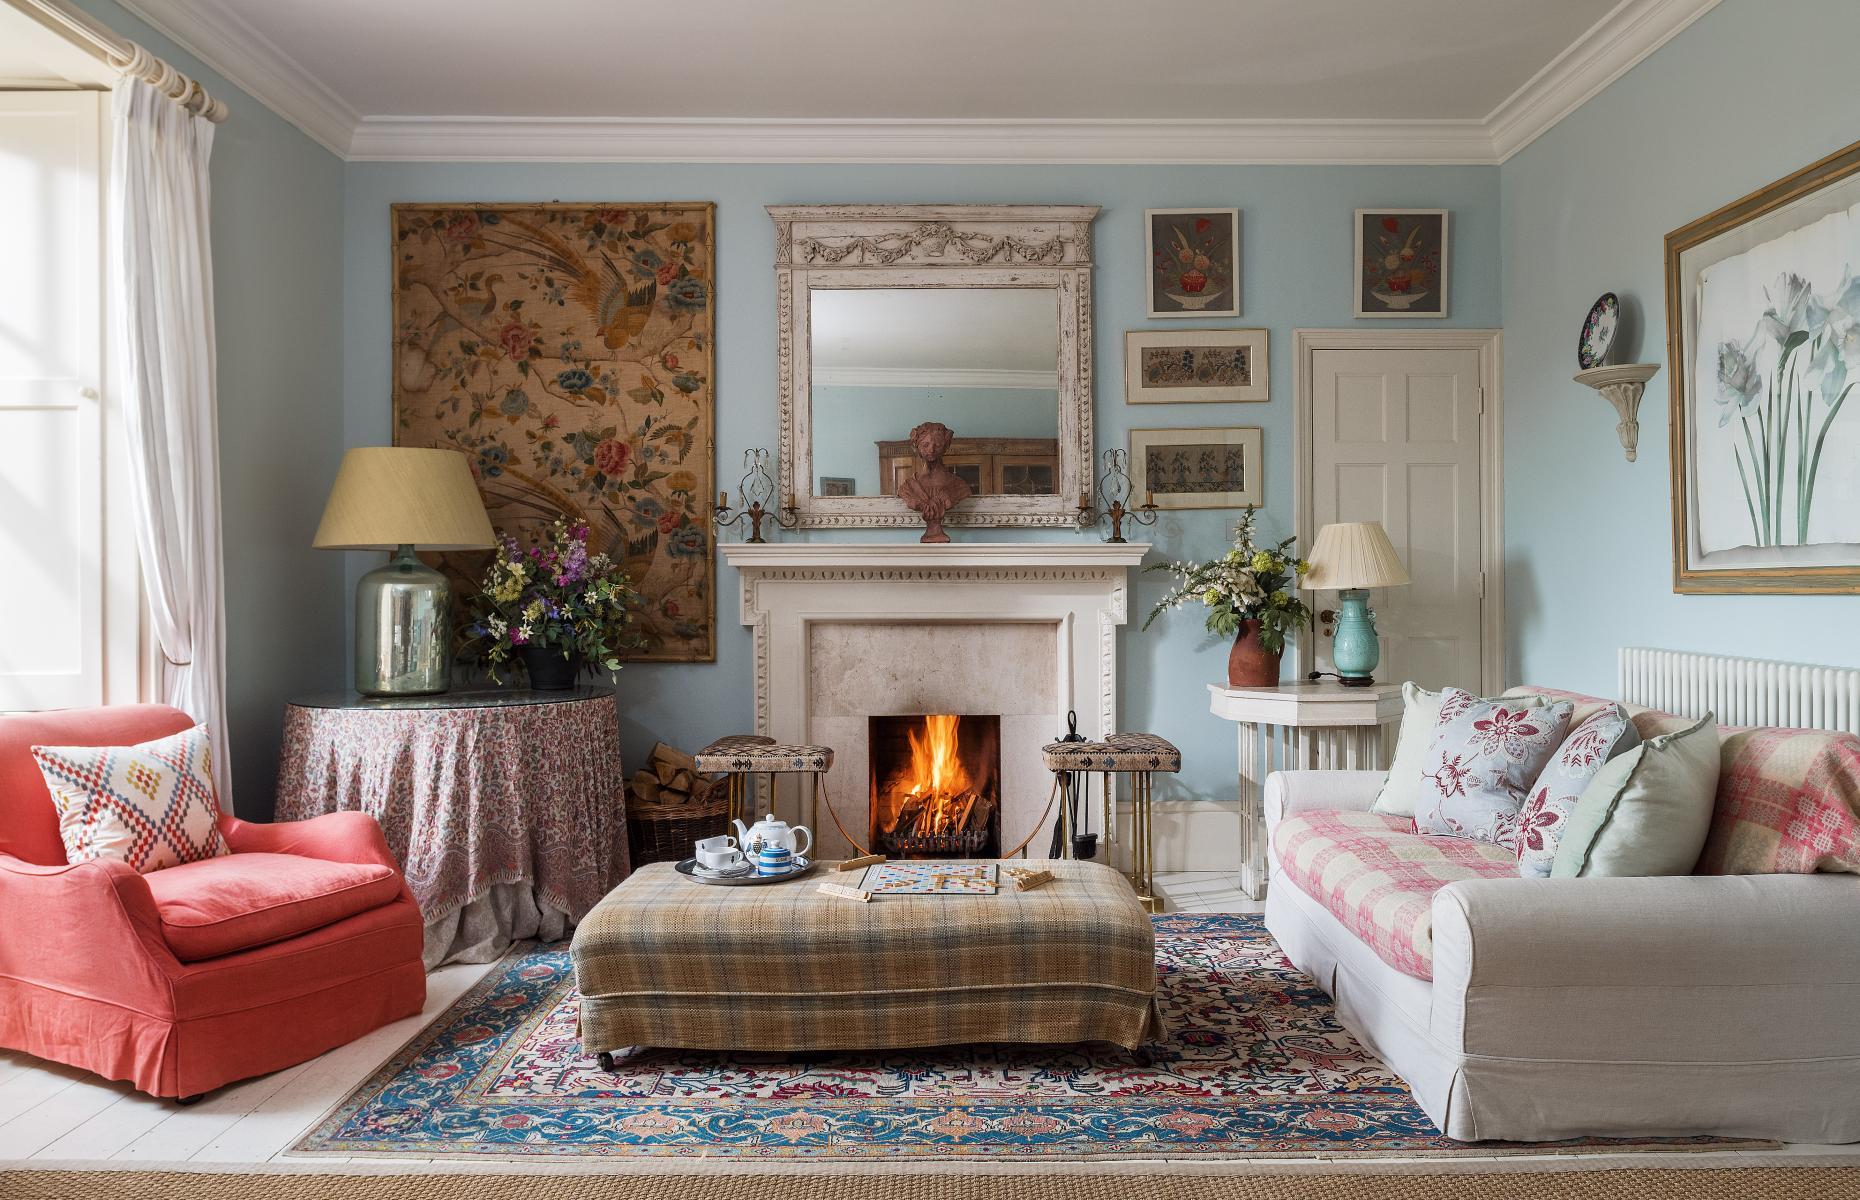 <p>They were no doubt impressed by its luxurious interiors designed by the Queen’s sister Annabel Elliot, who has taken great care to retain the character of the house while combining contemporary British brands with antique and market finds to create its inviting atmosphere.</p>  <p>The light blue walls set off a variety of textiles and artworks in this living room, while the antique rug was found at auction.</p>